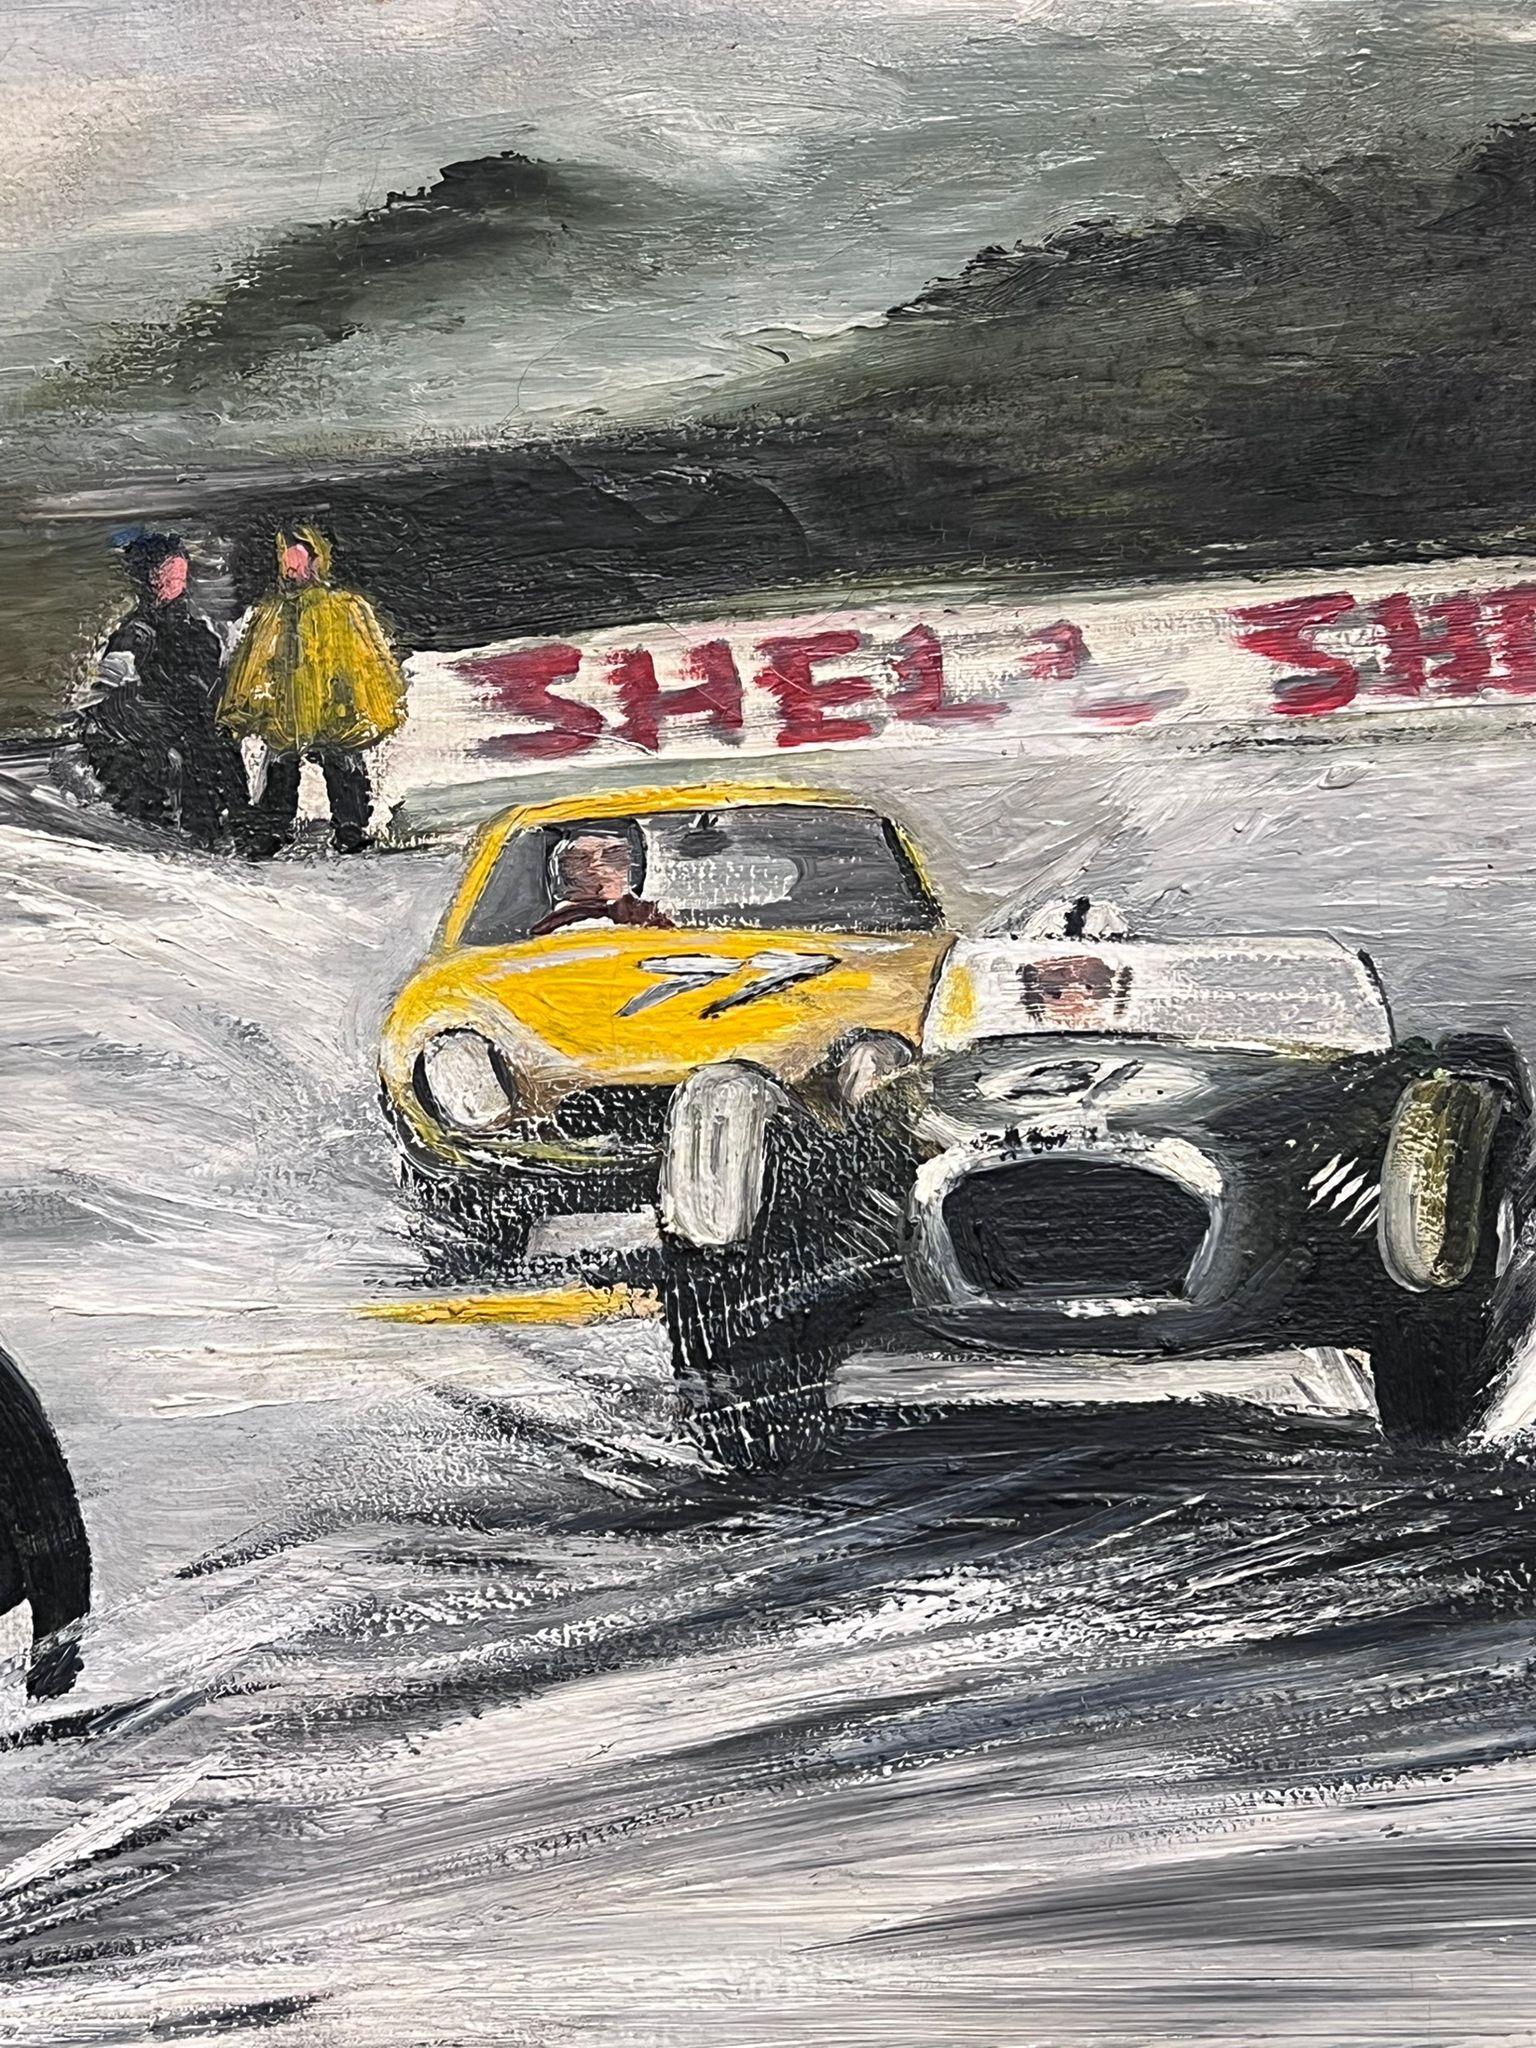 Jaguar Motor Racing
Sylvia Smith (British 20th century). 
signed and dated Jul. 65'
oil on canvas, framed
framed: 28.5 x 34.5 inches
canvas: 24 x 30 inches
provenance: private collection, UK
condition: very good and sound condition 